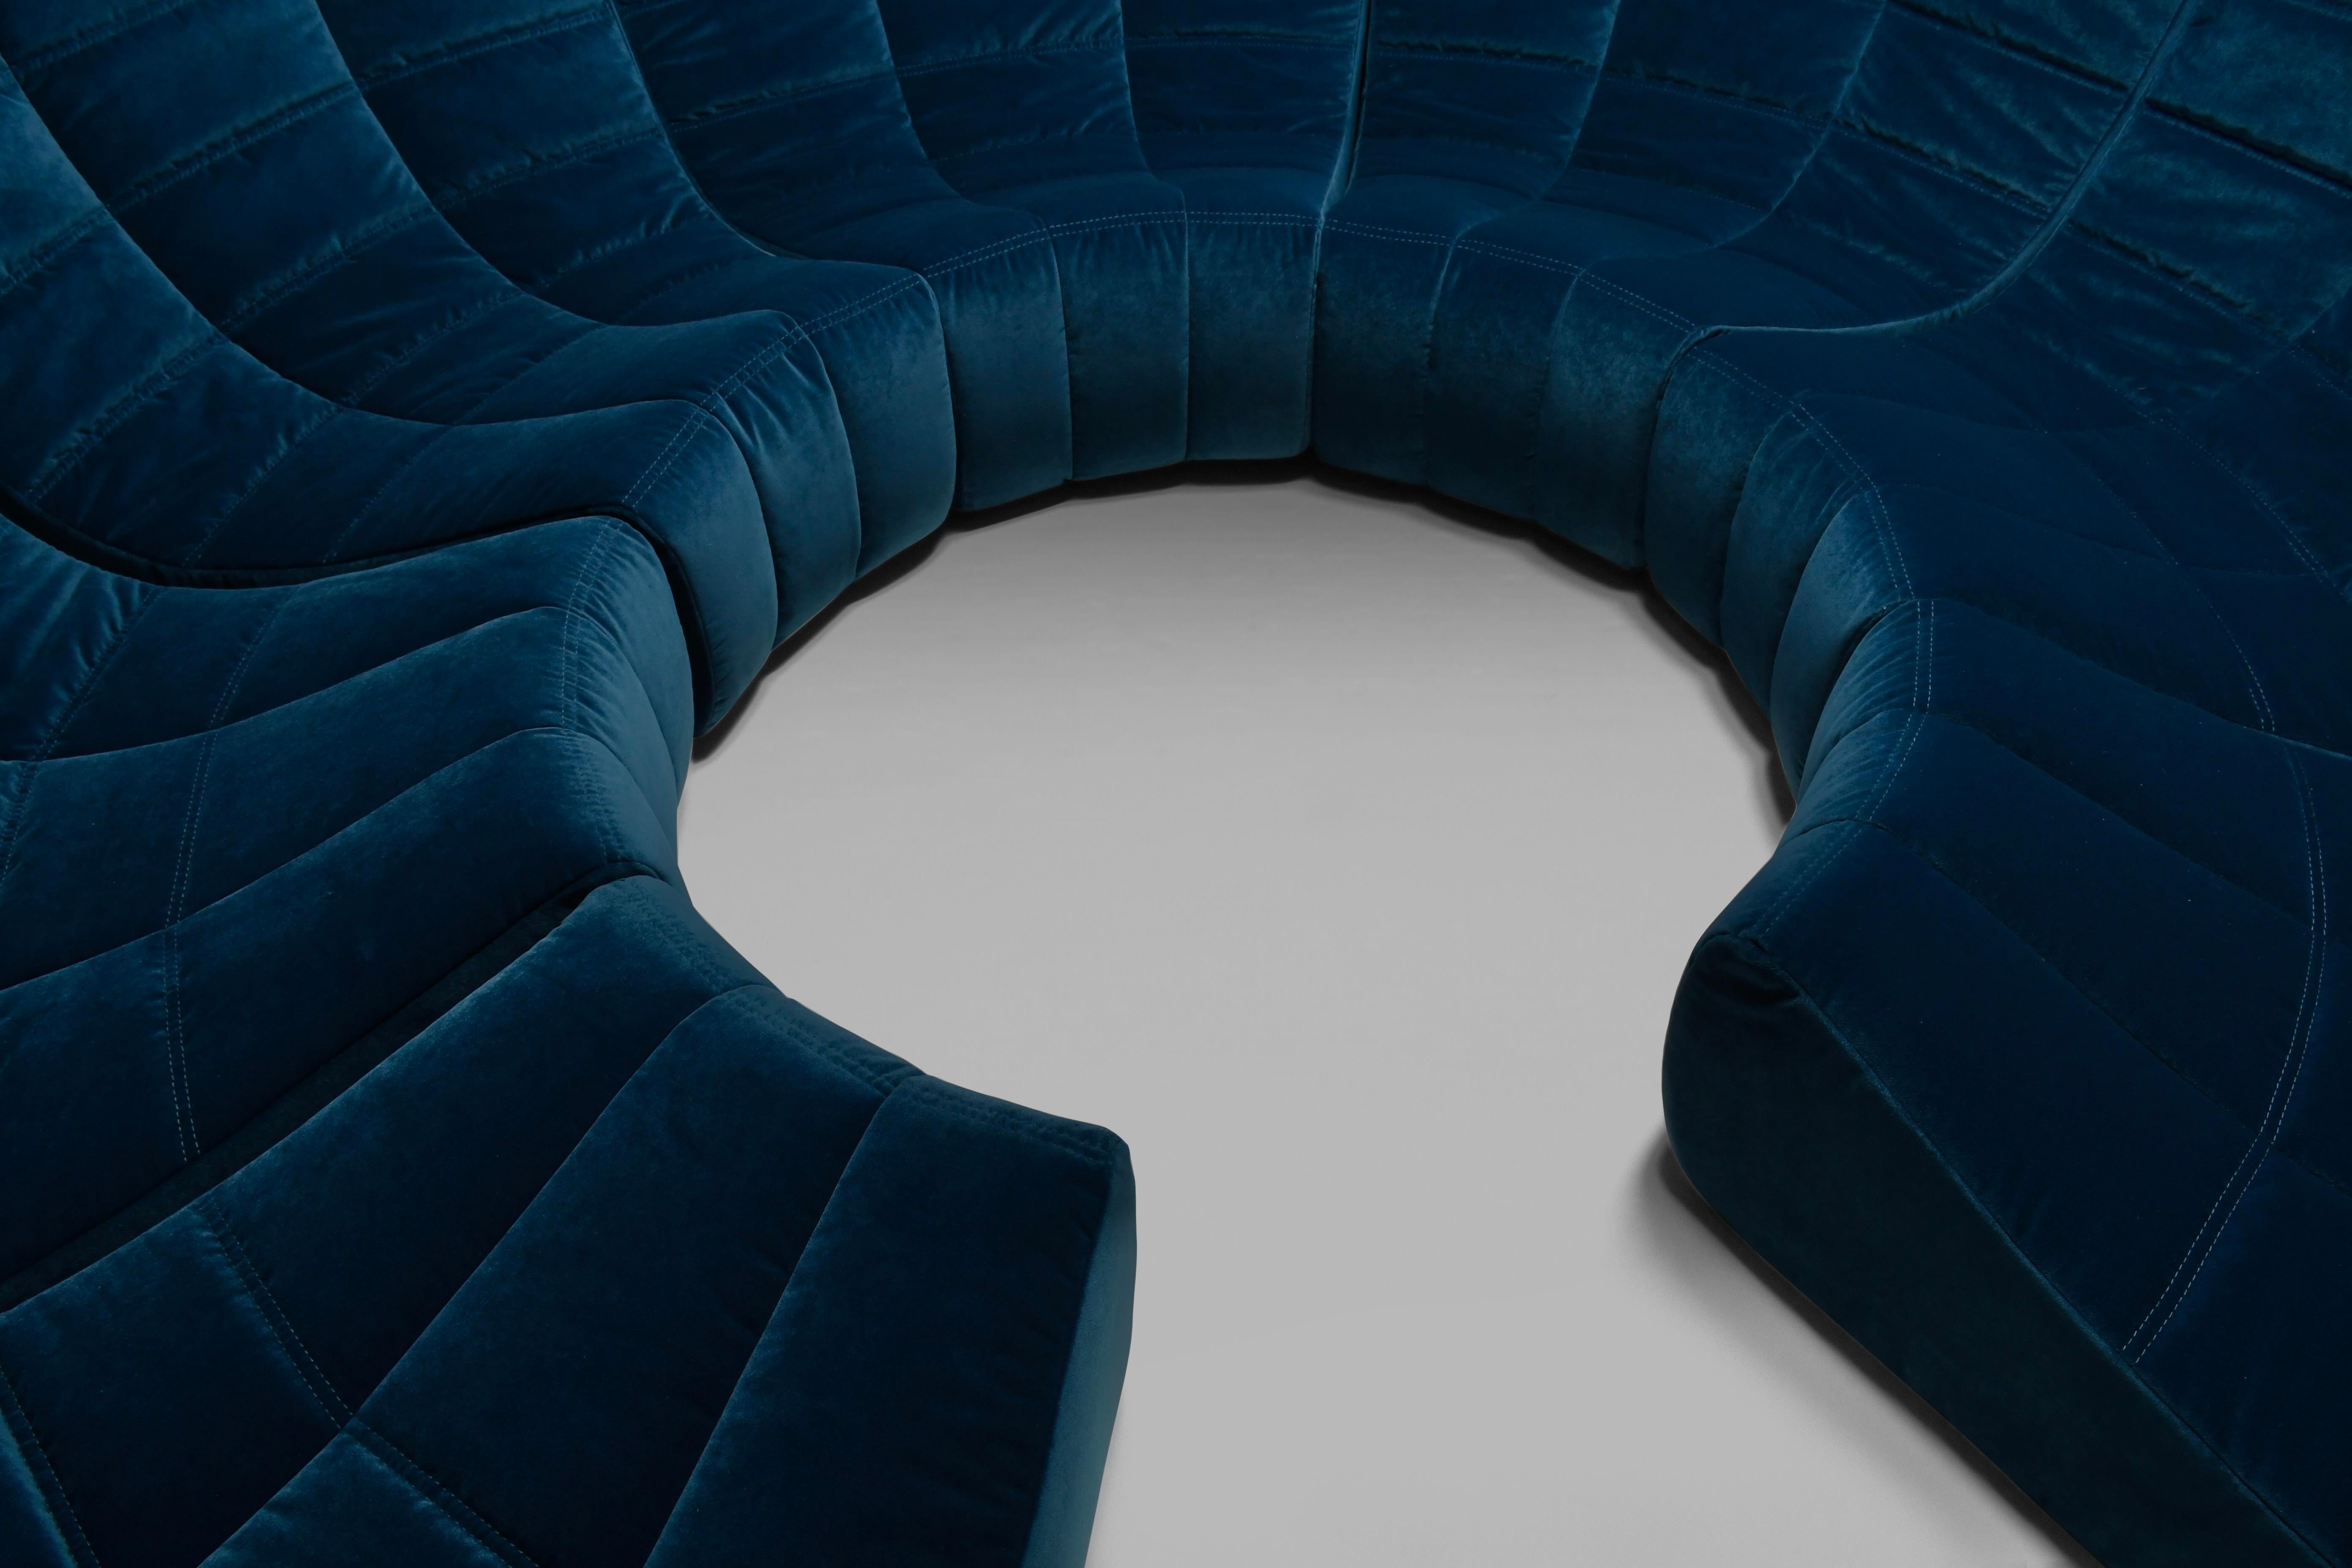 Rare and Exceptional 'Gilda' Circle Sofa in Velvet by Michel Ducaroy, 1972 For Sale 2